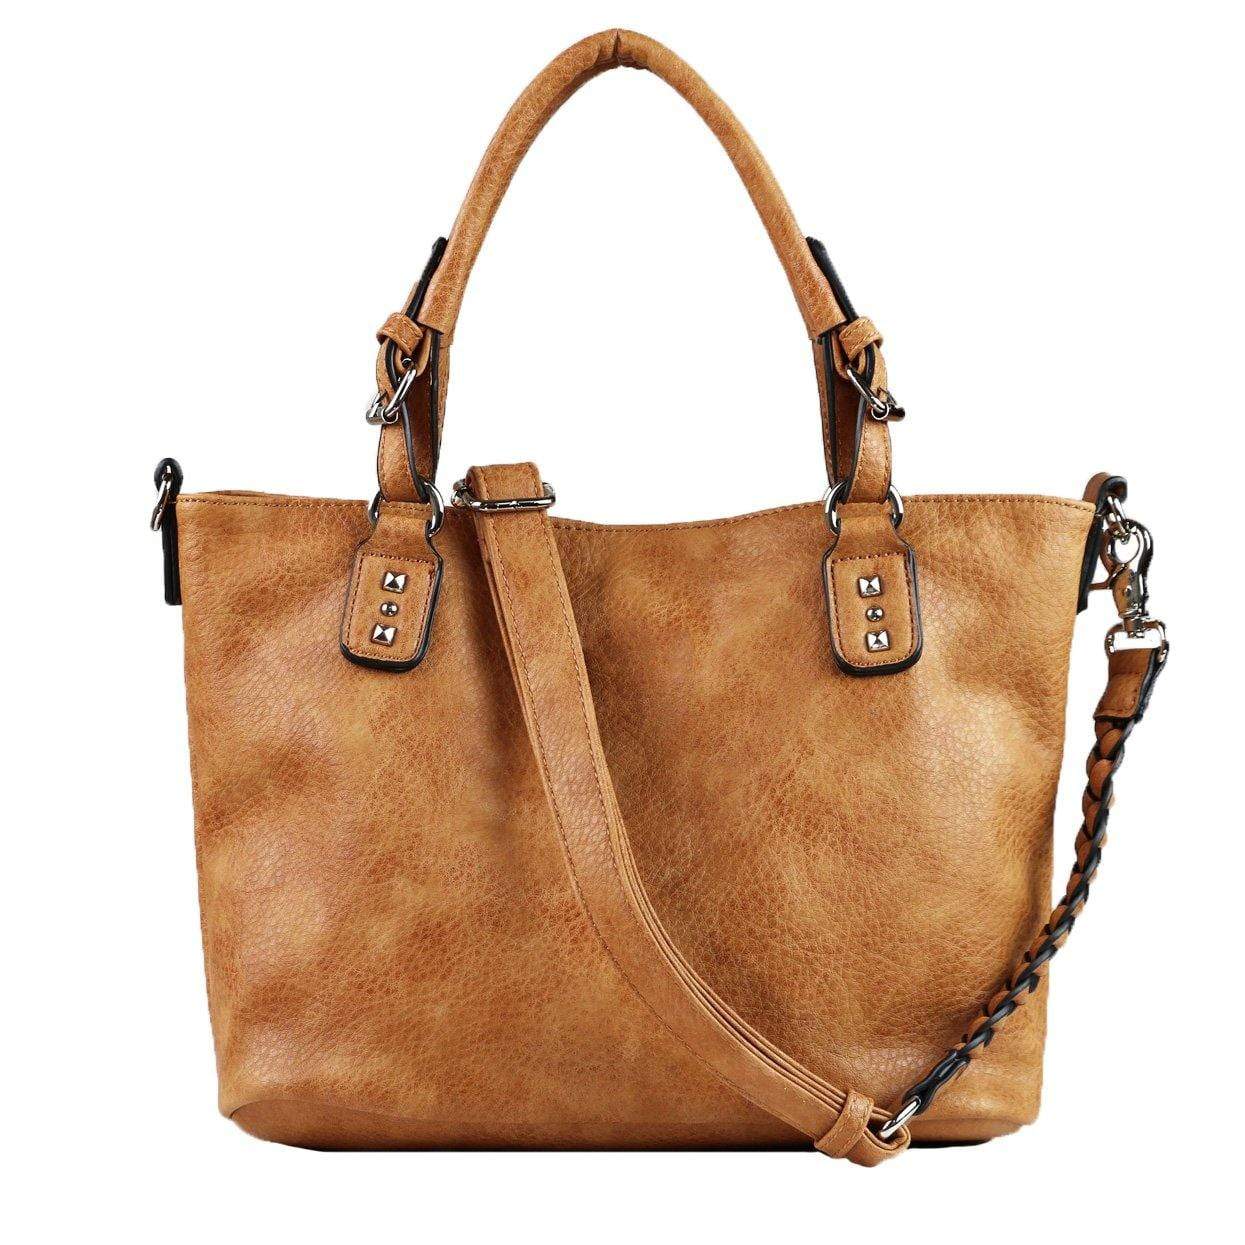 Concealed Carry Ella Tote by Lady Conceal